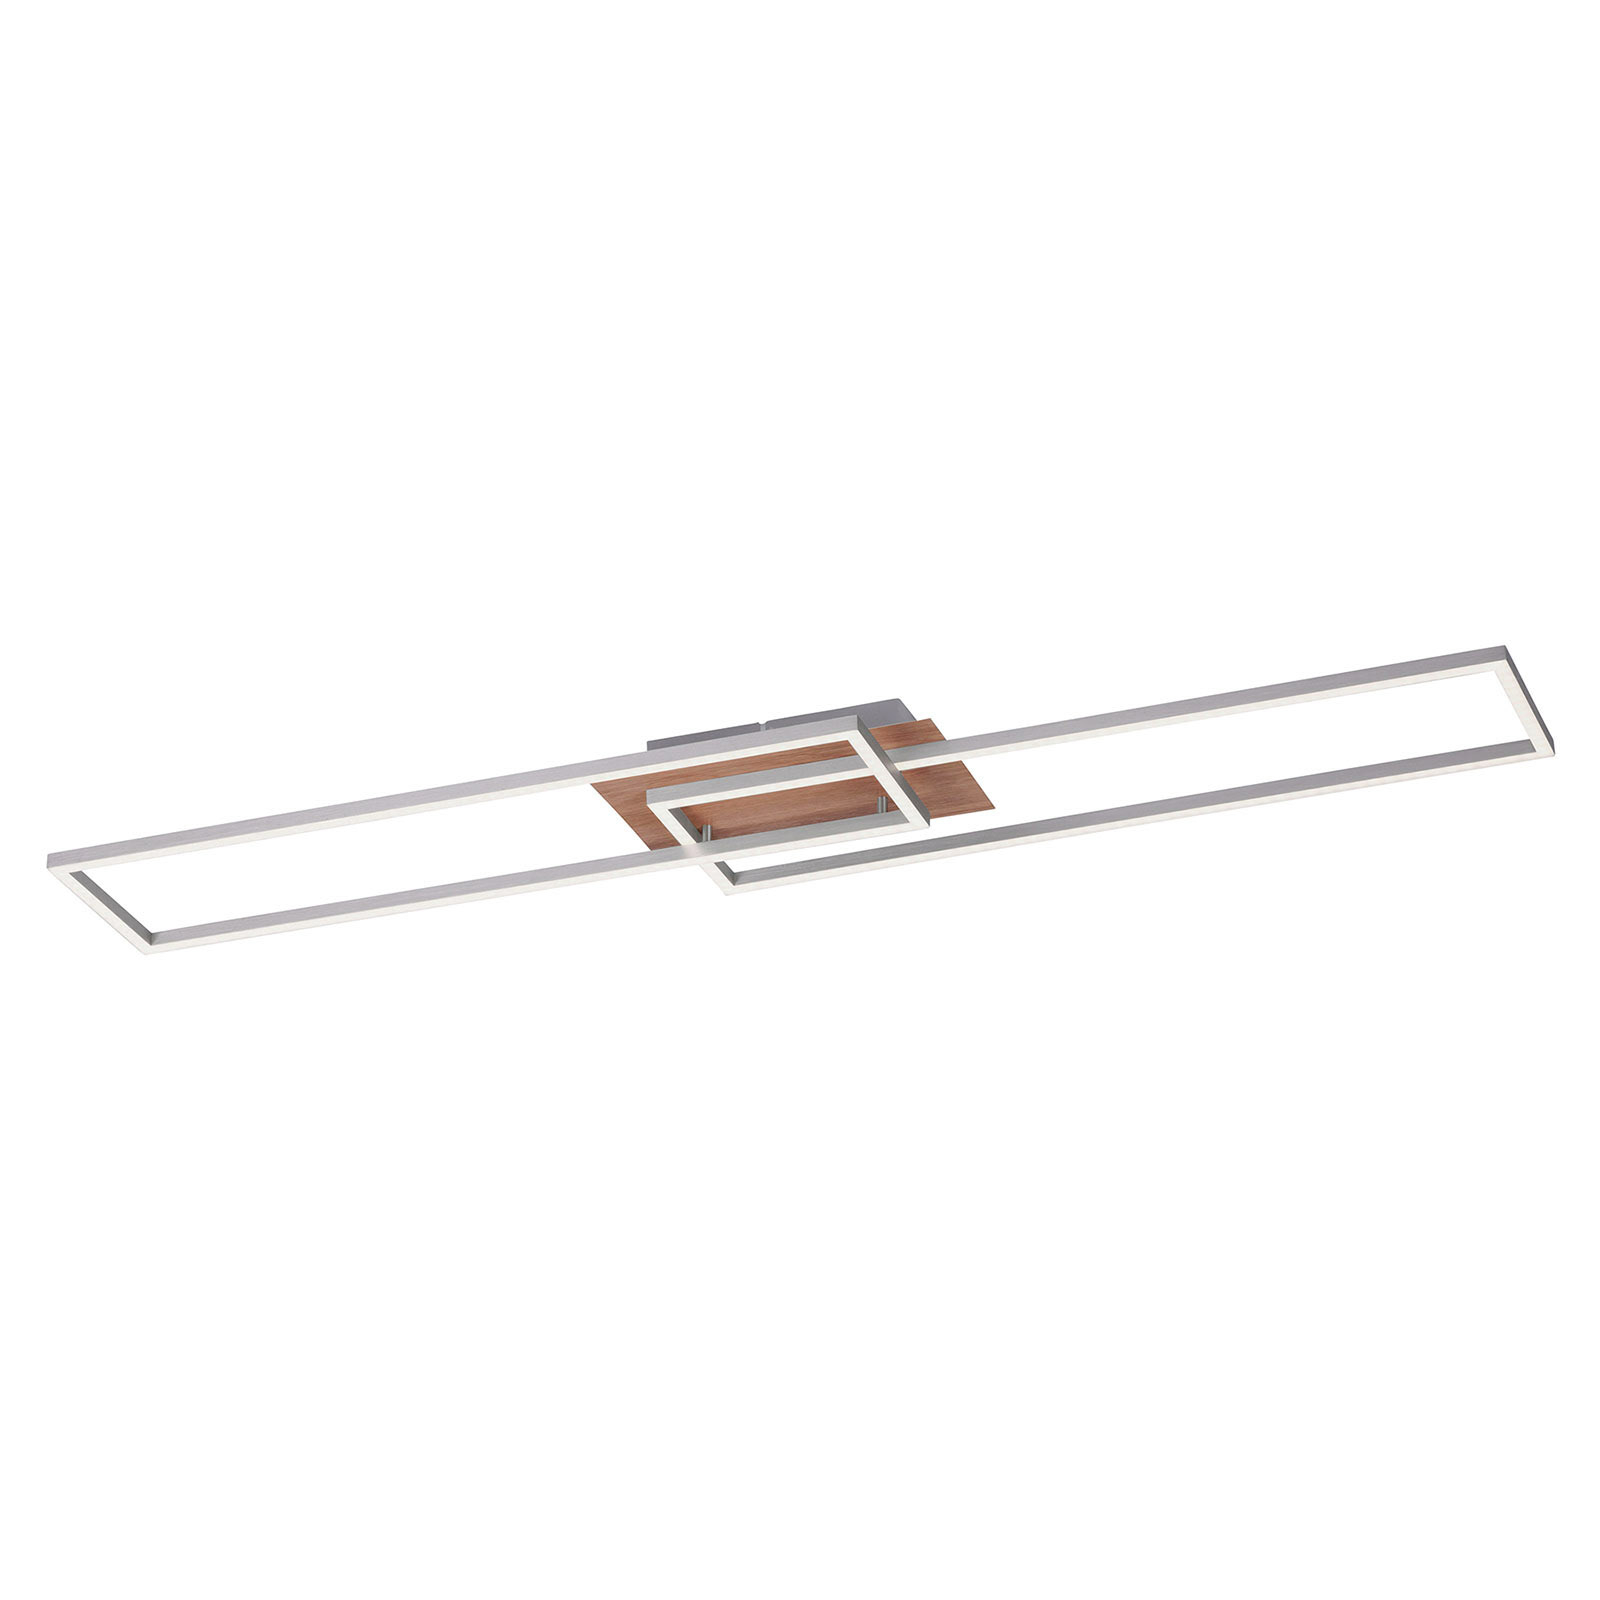 Iven ceiling wood look/steel 2-bulb rectangle